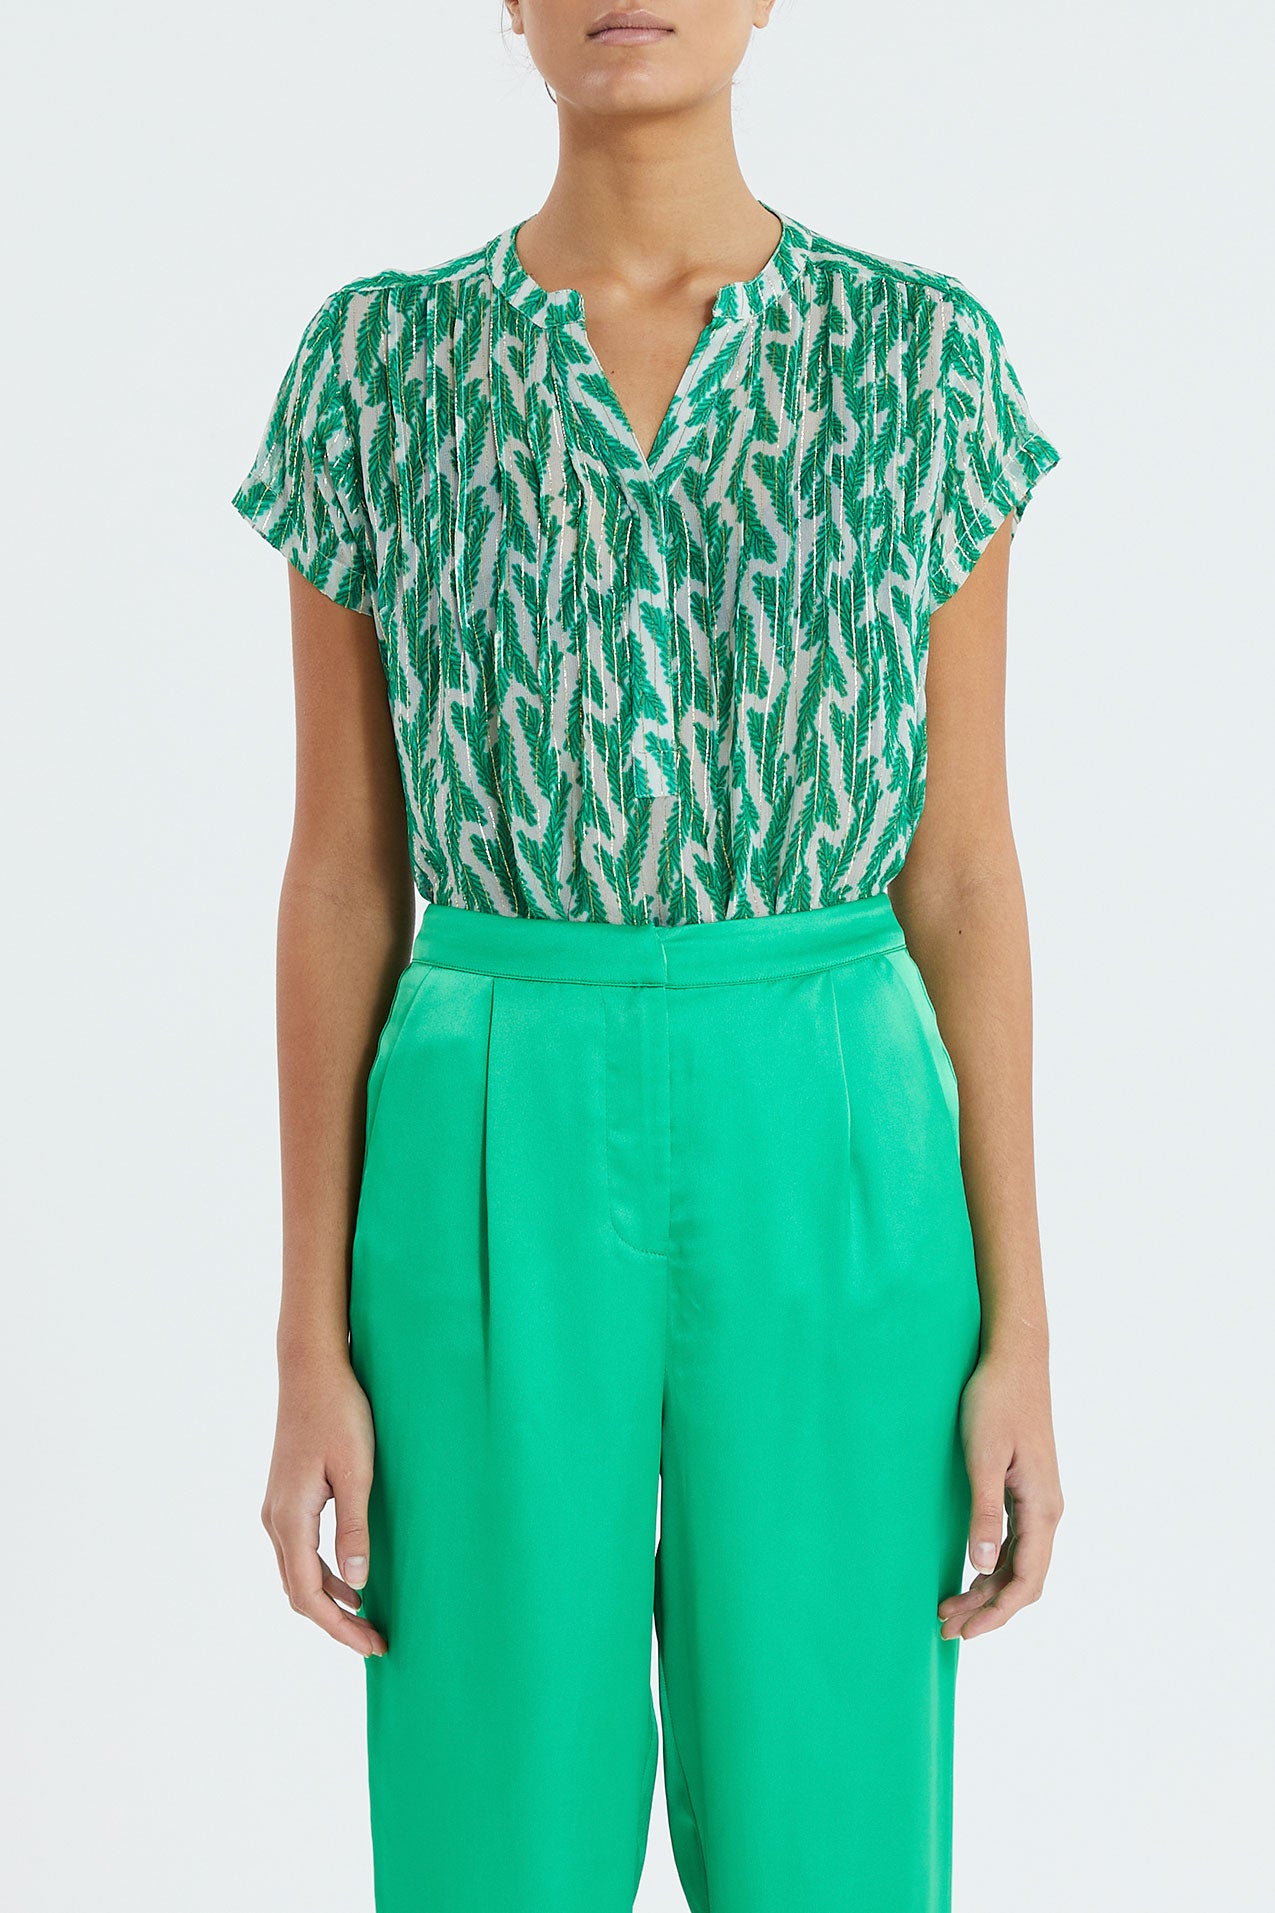 Lollys Laundry Heather Top - Green Leaf